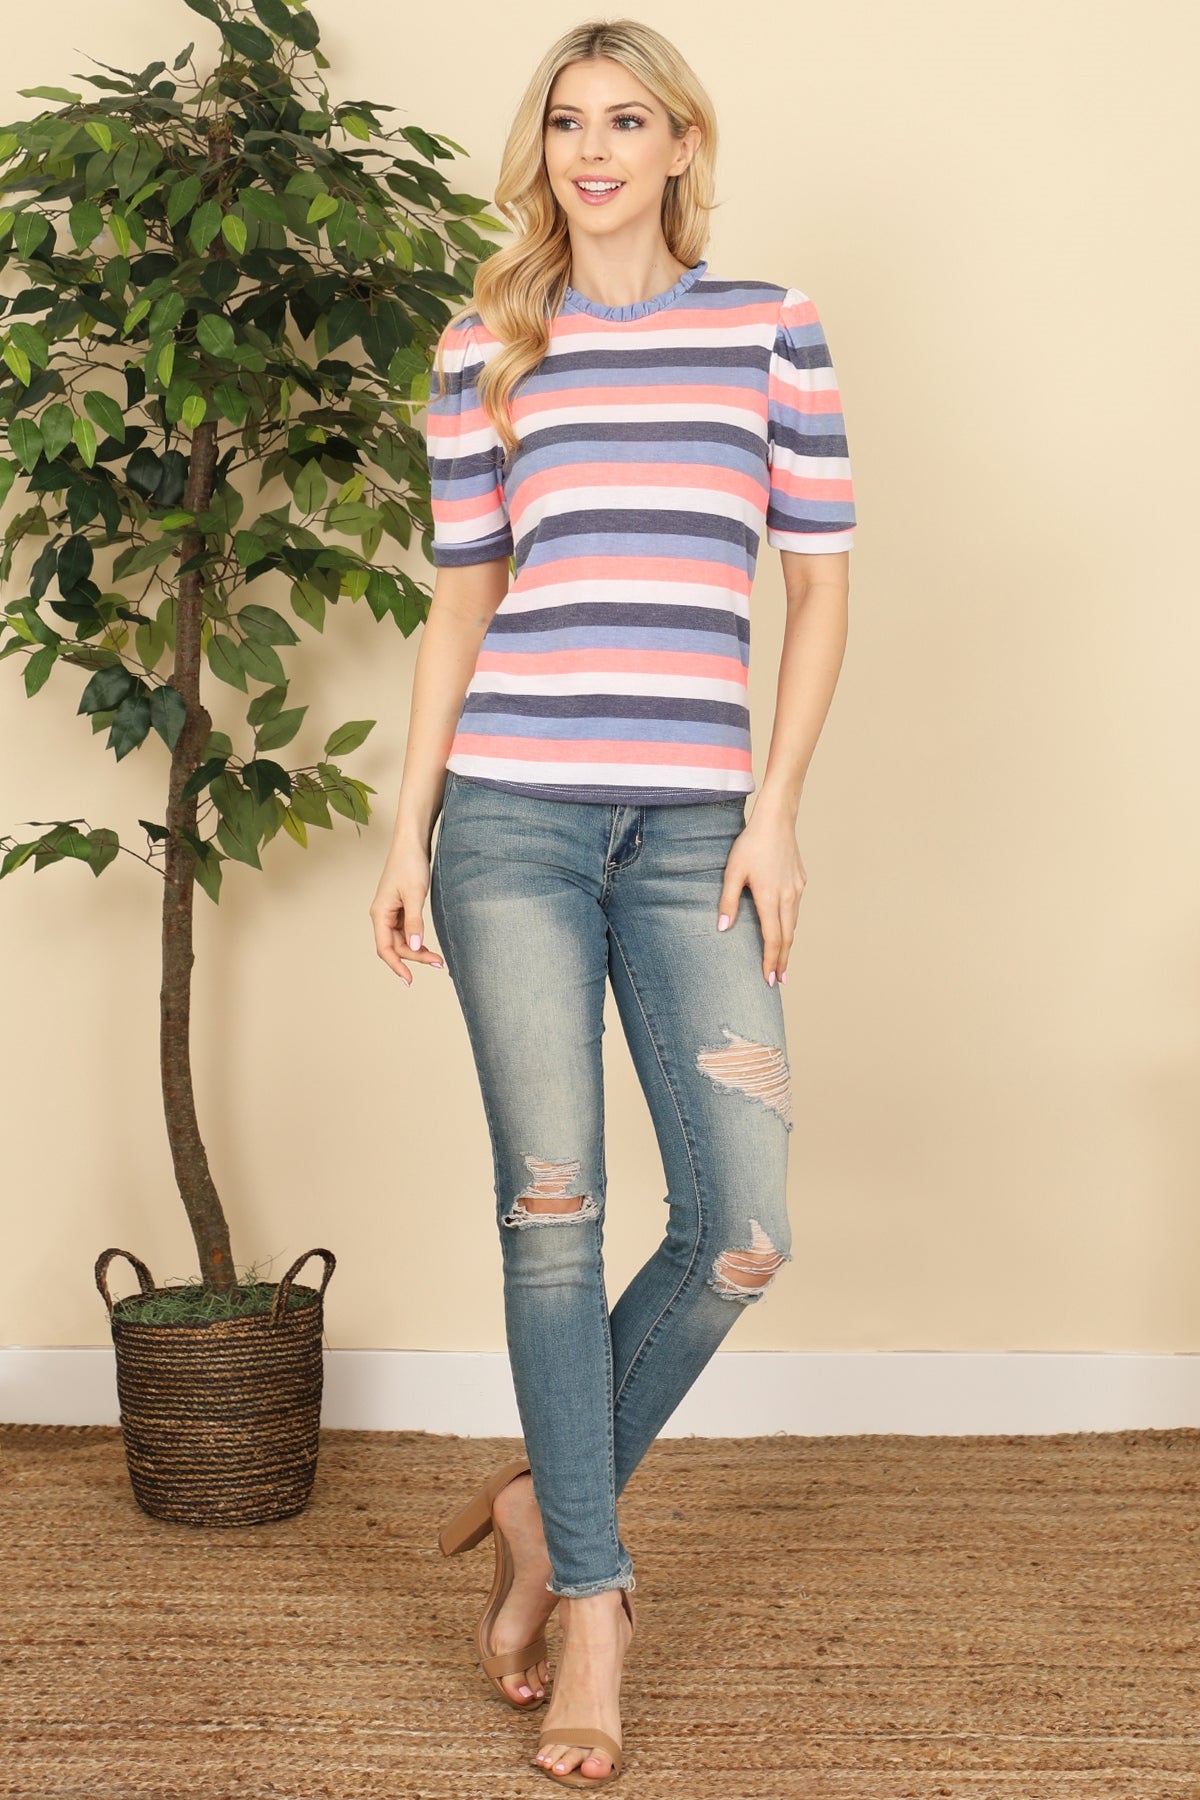 CORAL MULTI STRIPES MERROW NECKLINE TOP-2-2-2 (NOW $3.00 ONLY!)